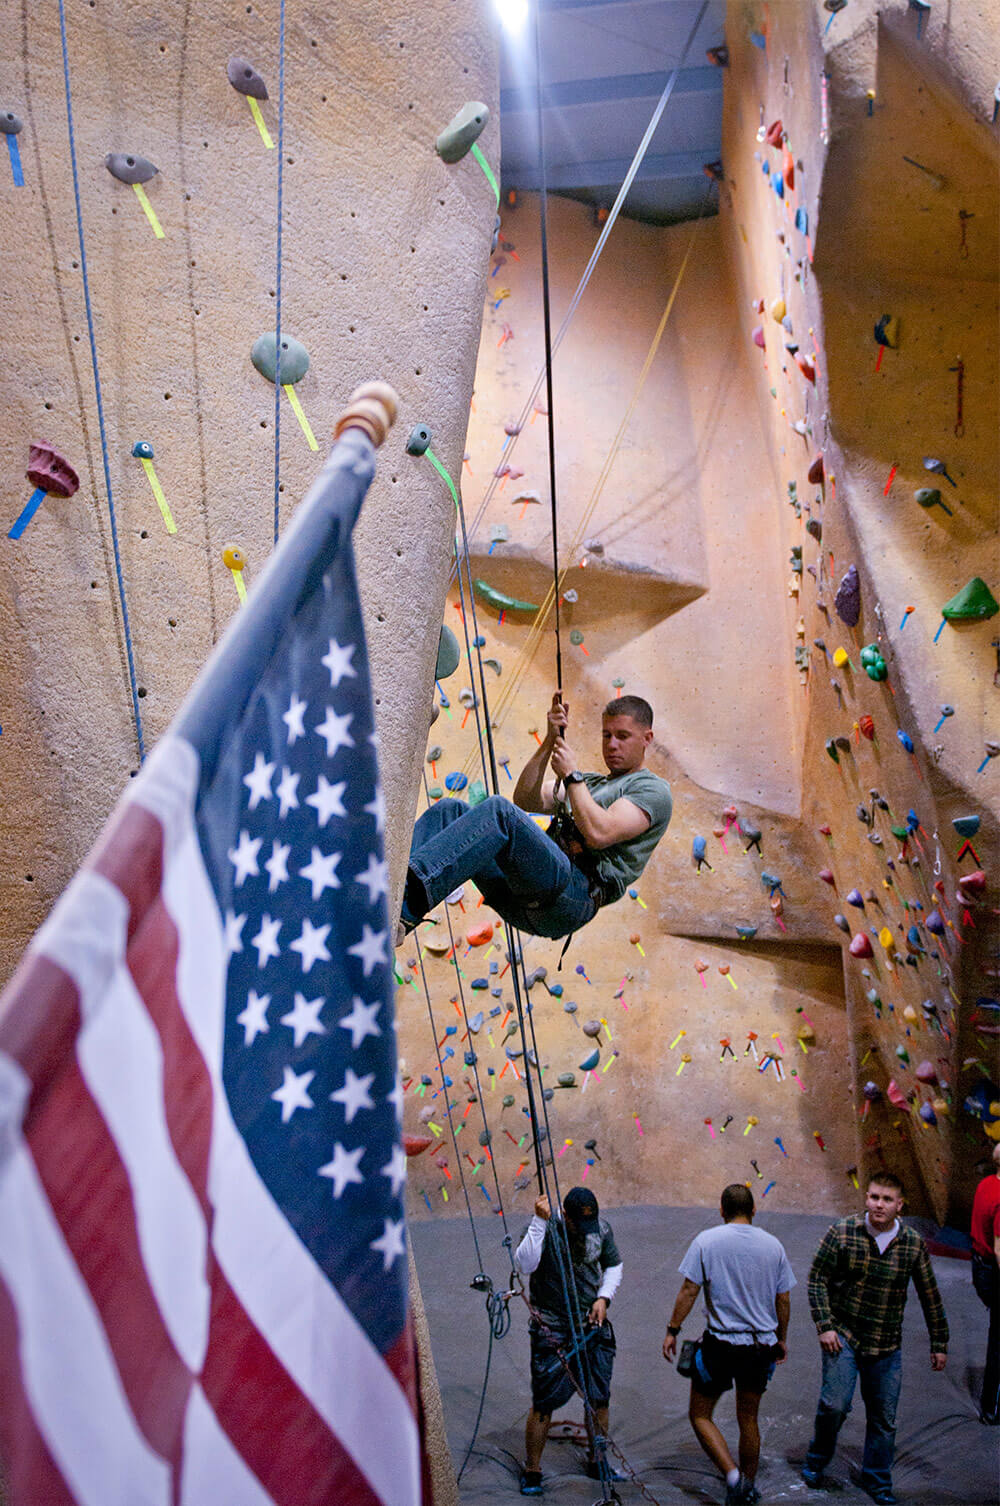 1LT Nick Westendorf, an operations officer with Headquarters and Headquarters Company, 8th Engineer Battalion, belays down after climbing a wall in the Boulders Sport Climbing Center in Harker Heights, Texas, as part of a Warrior Adventure Quest event.